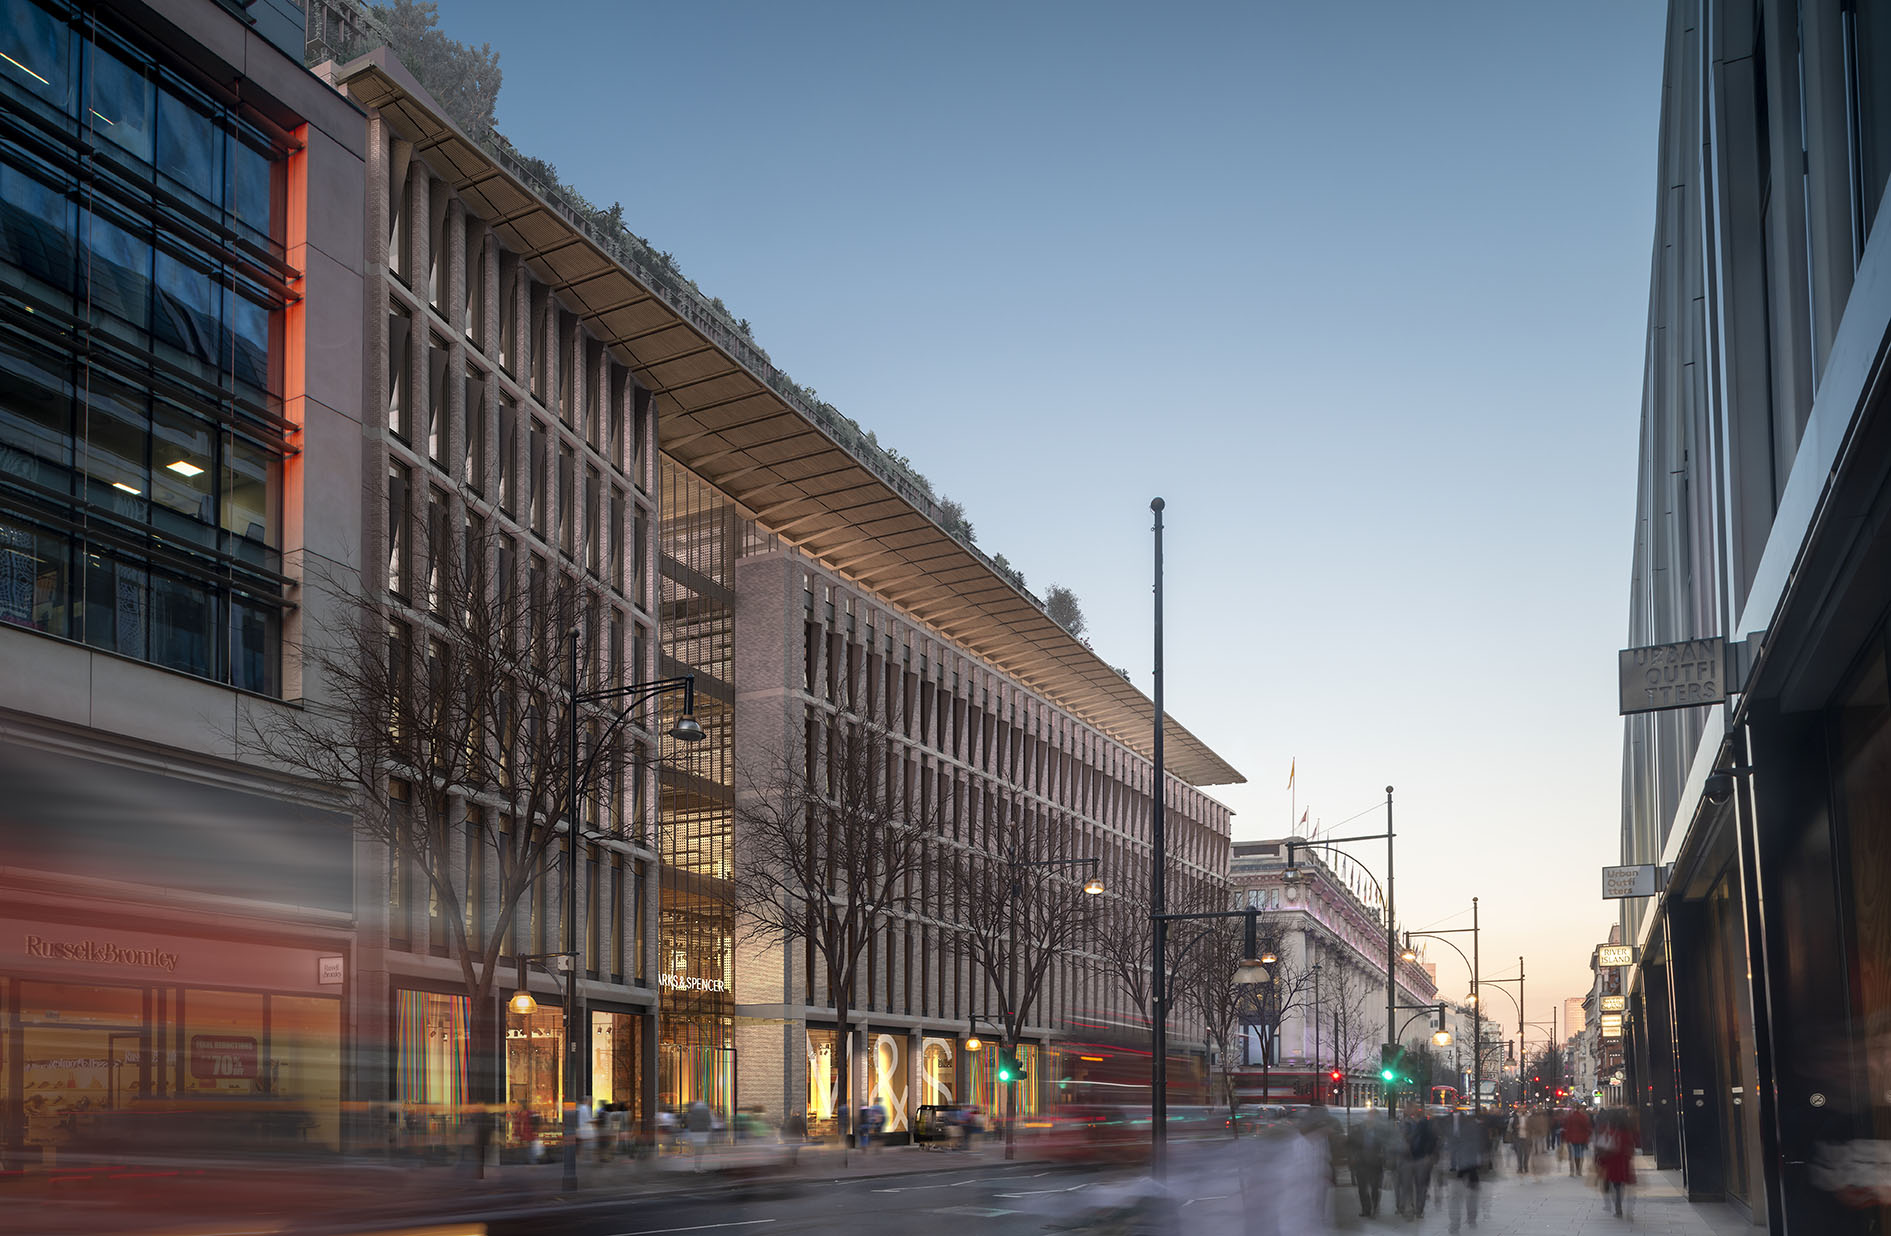 Plans Granted for M&S Oxford Street Store to be Demolished